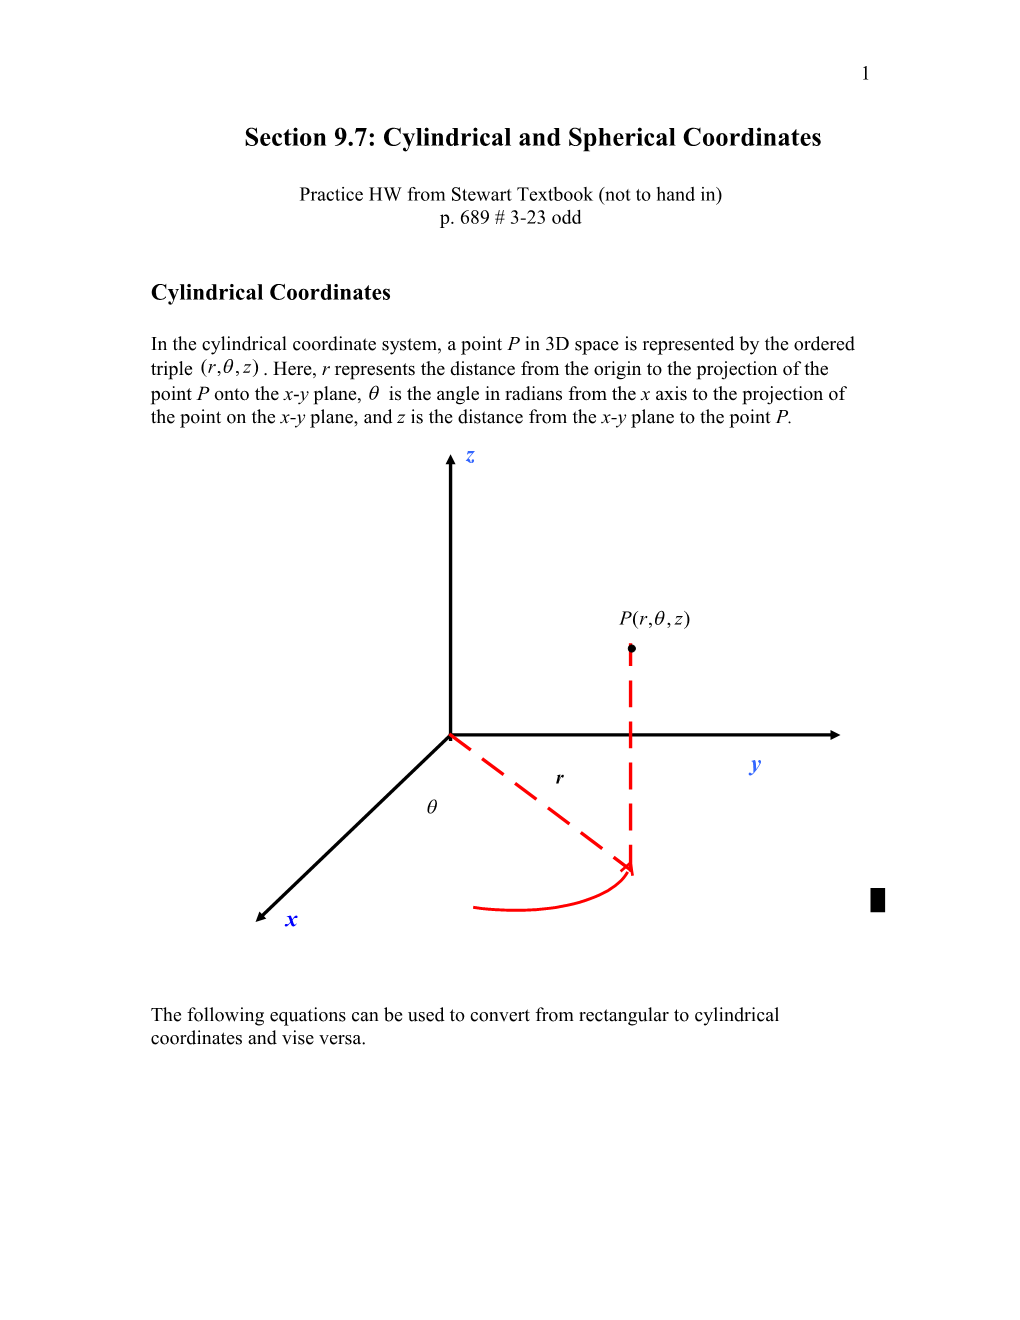 Section 9.7: Cylindrical and Spherical Coordinates